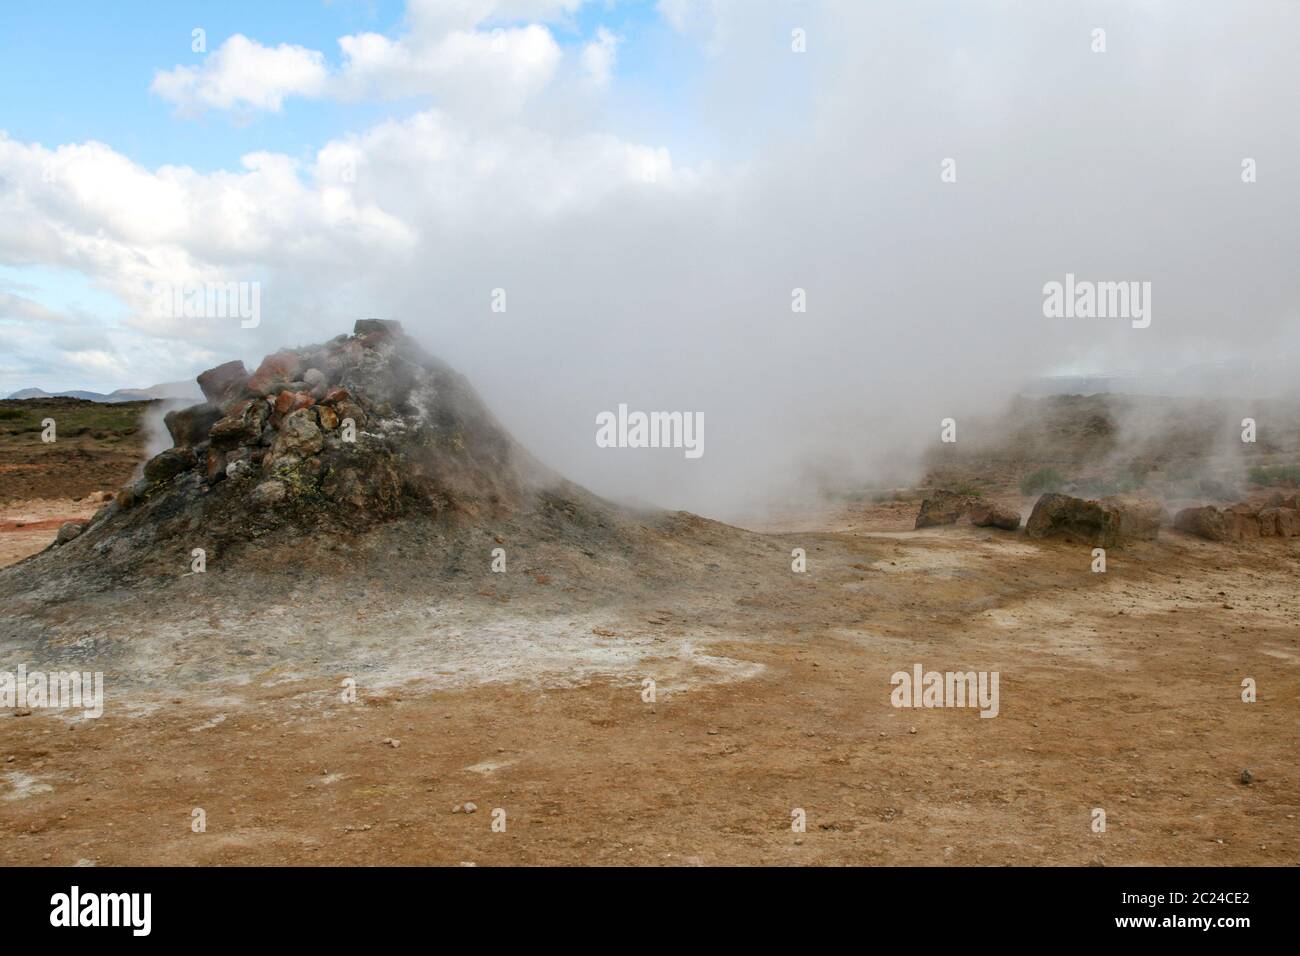 Small cone like volcano spits out steam as a cloud of smoke Stock Photo